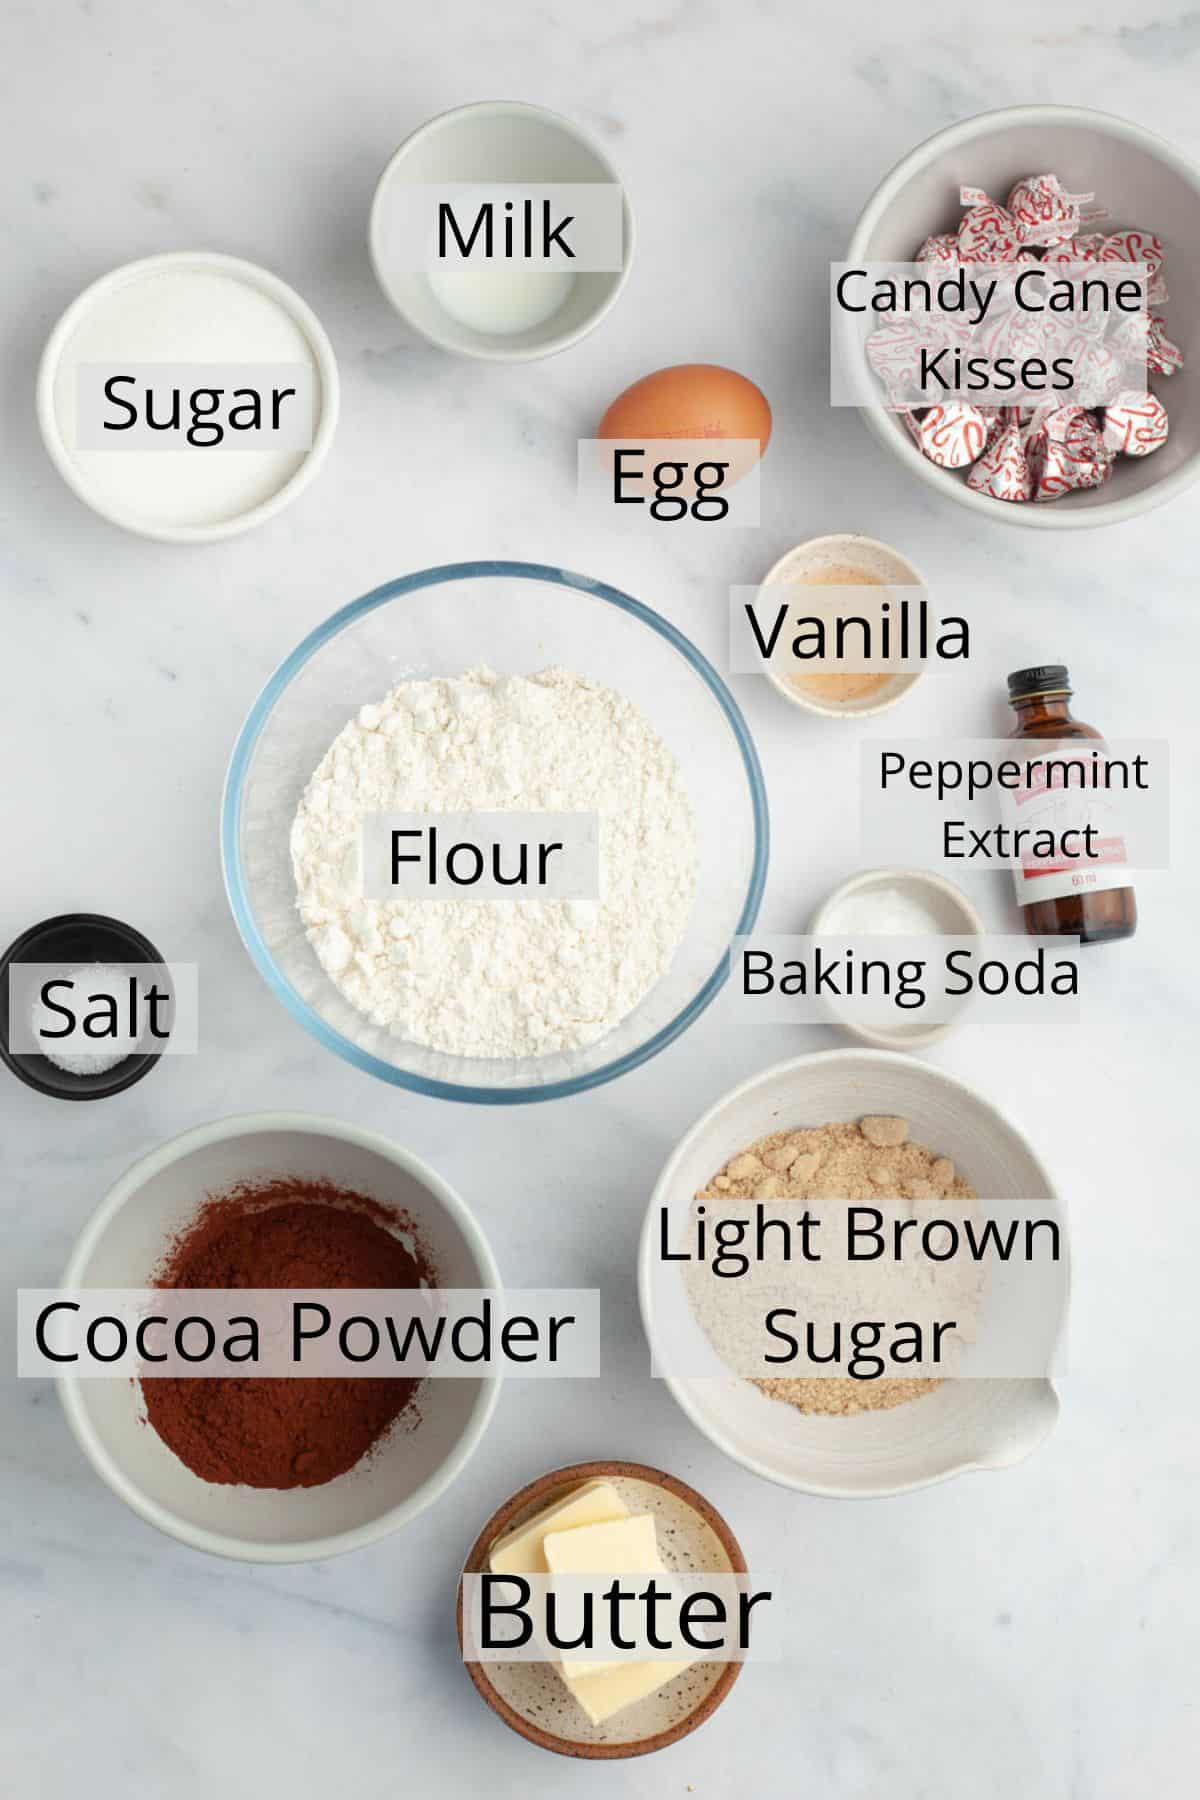 All the ingredients needed to make chocolate peppermint kiss cookies weighed out into small bowls.